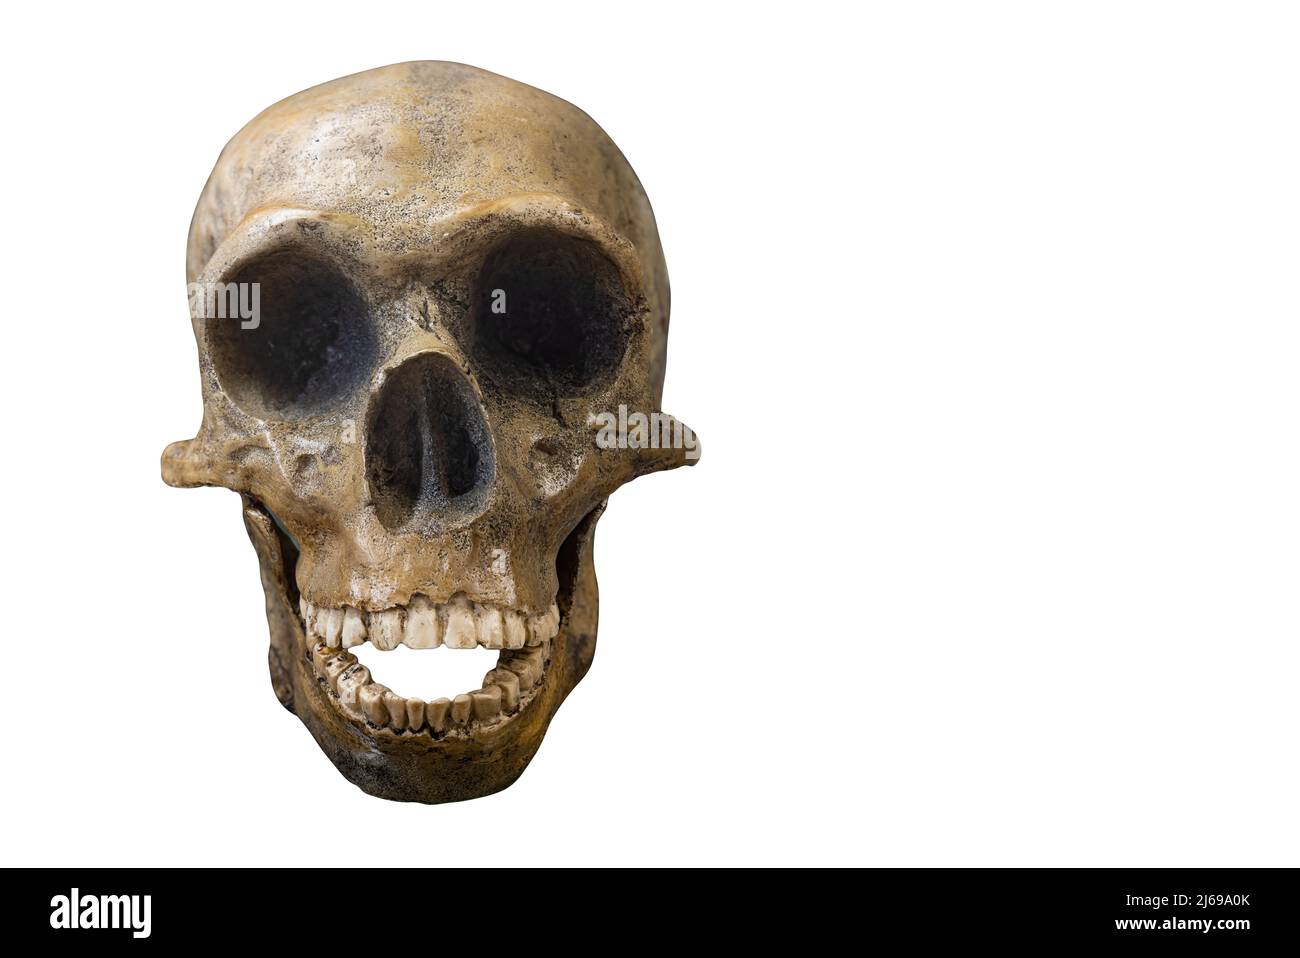 Skull of prehistoric man, Skull of neanderthalensis isolated on white background with space for text Stock Photo